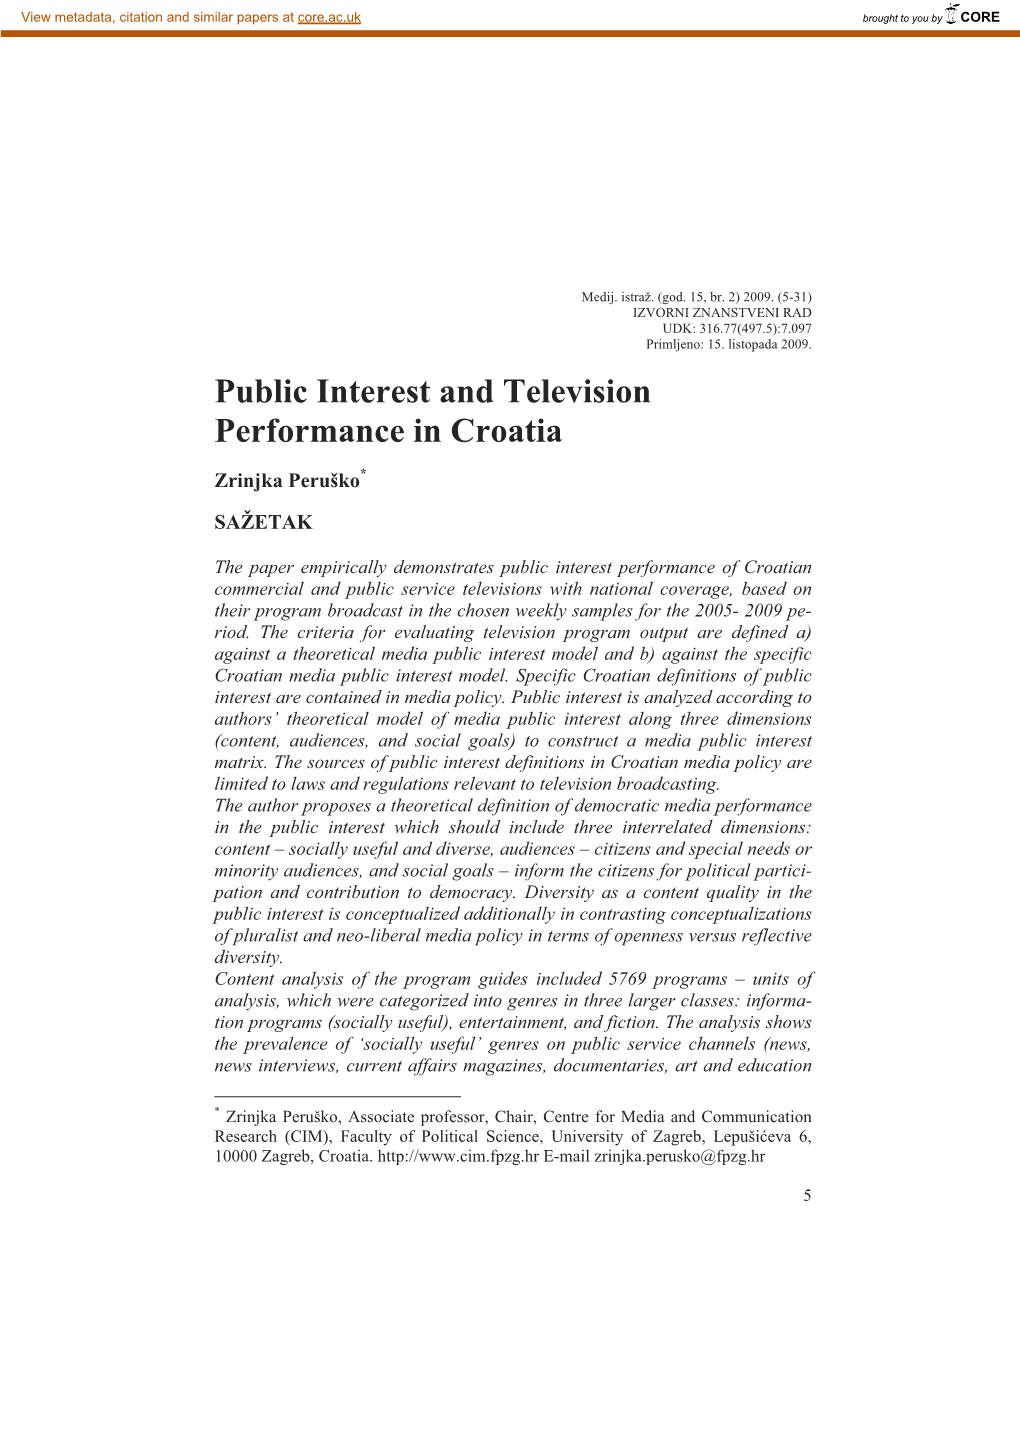 Public Interest and Television Performance in Croatia